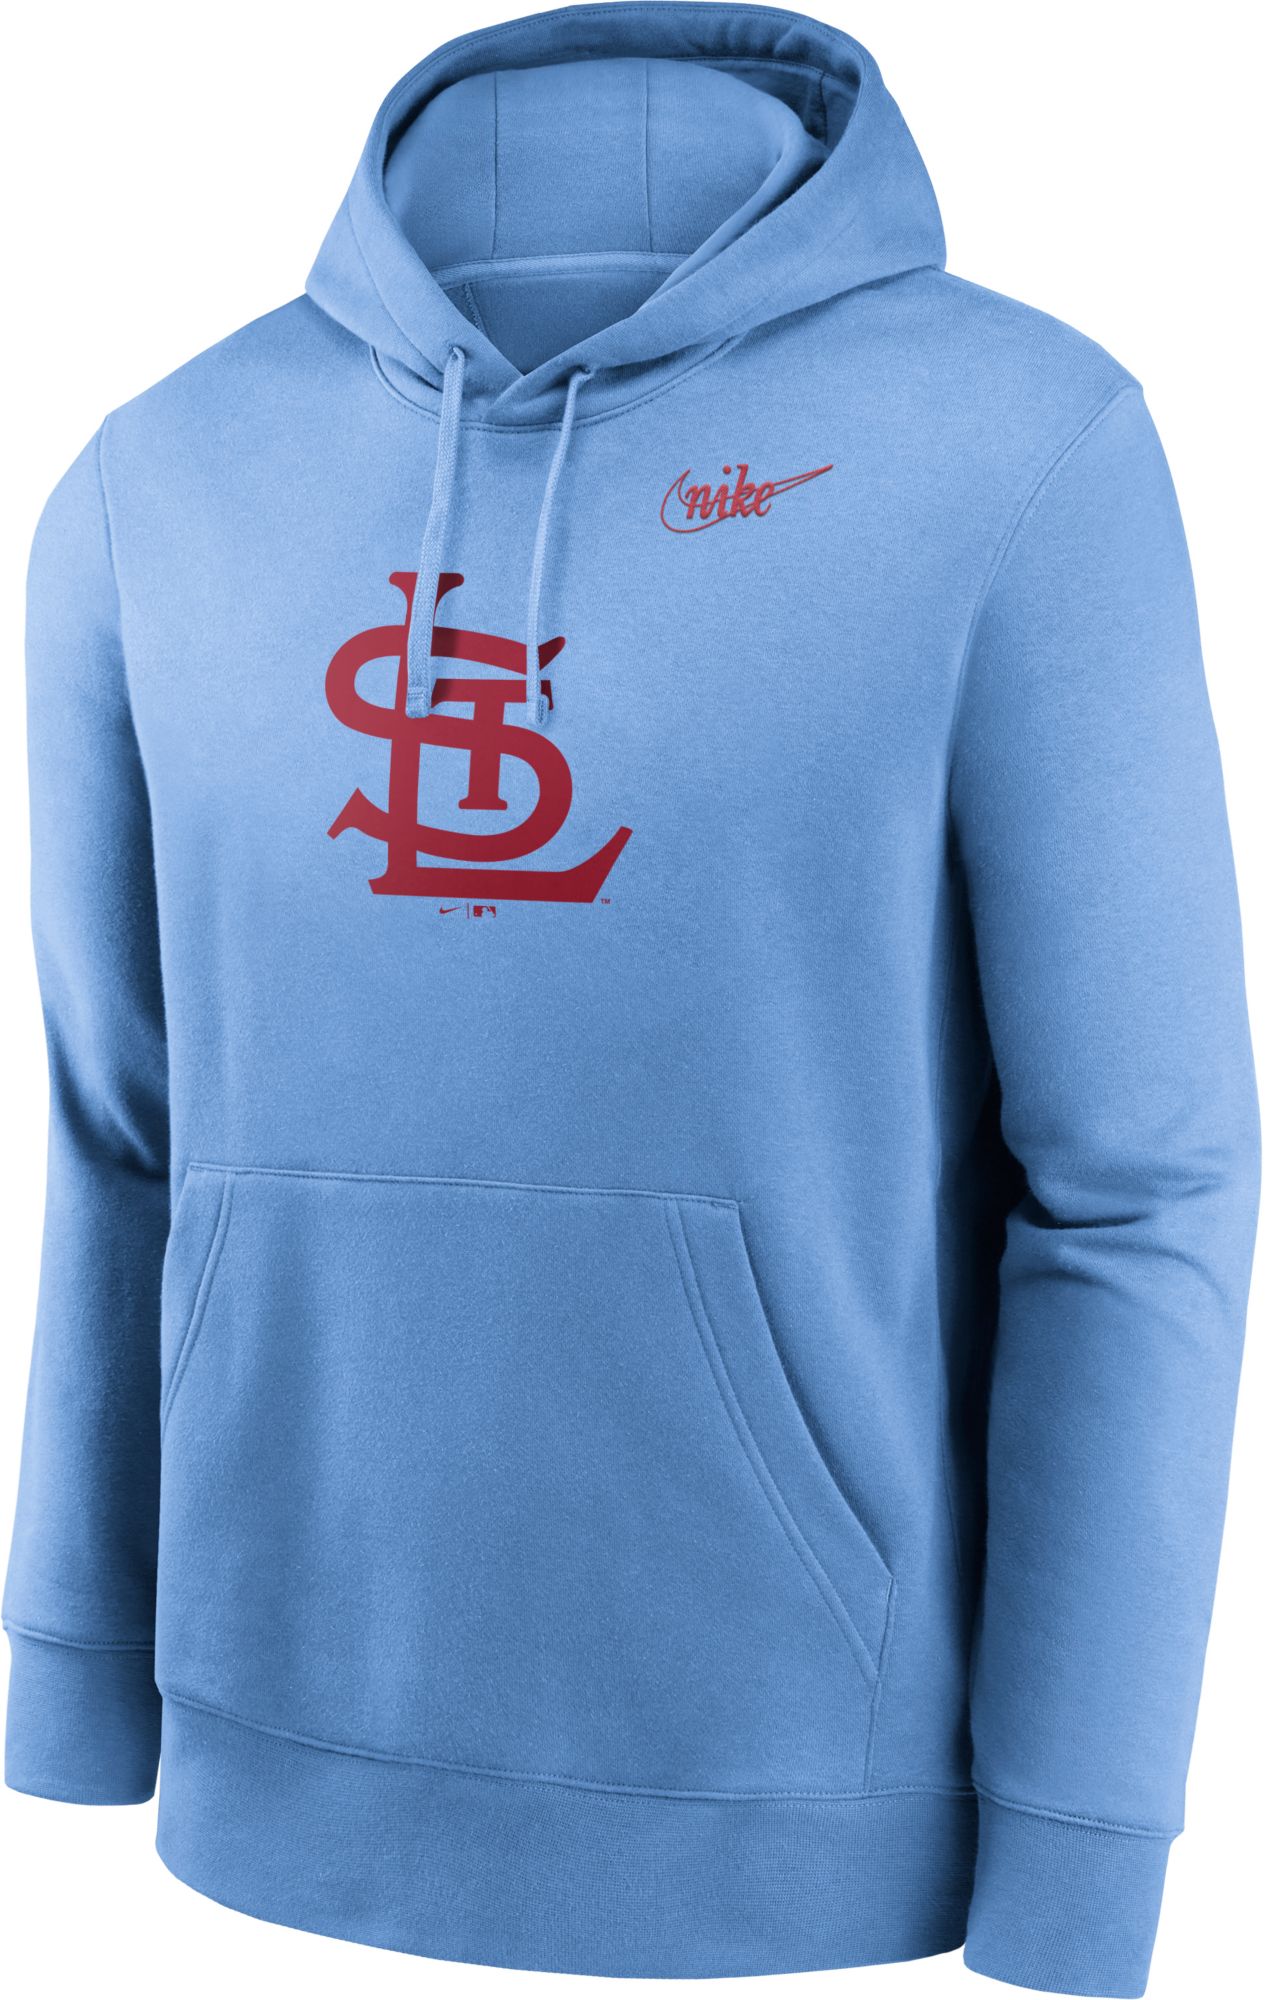 St. Louis Cardinals Apparel & Gear  Curbside Pickup Available at DICK'S